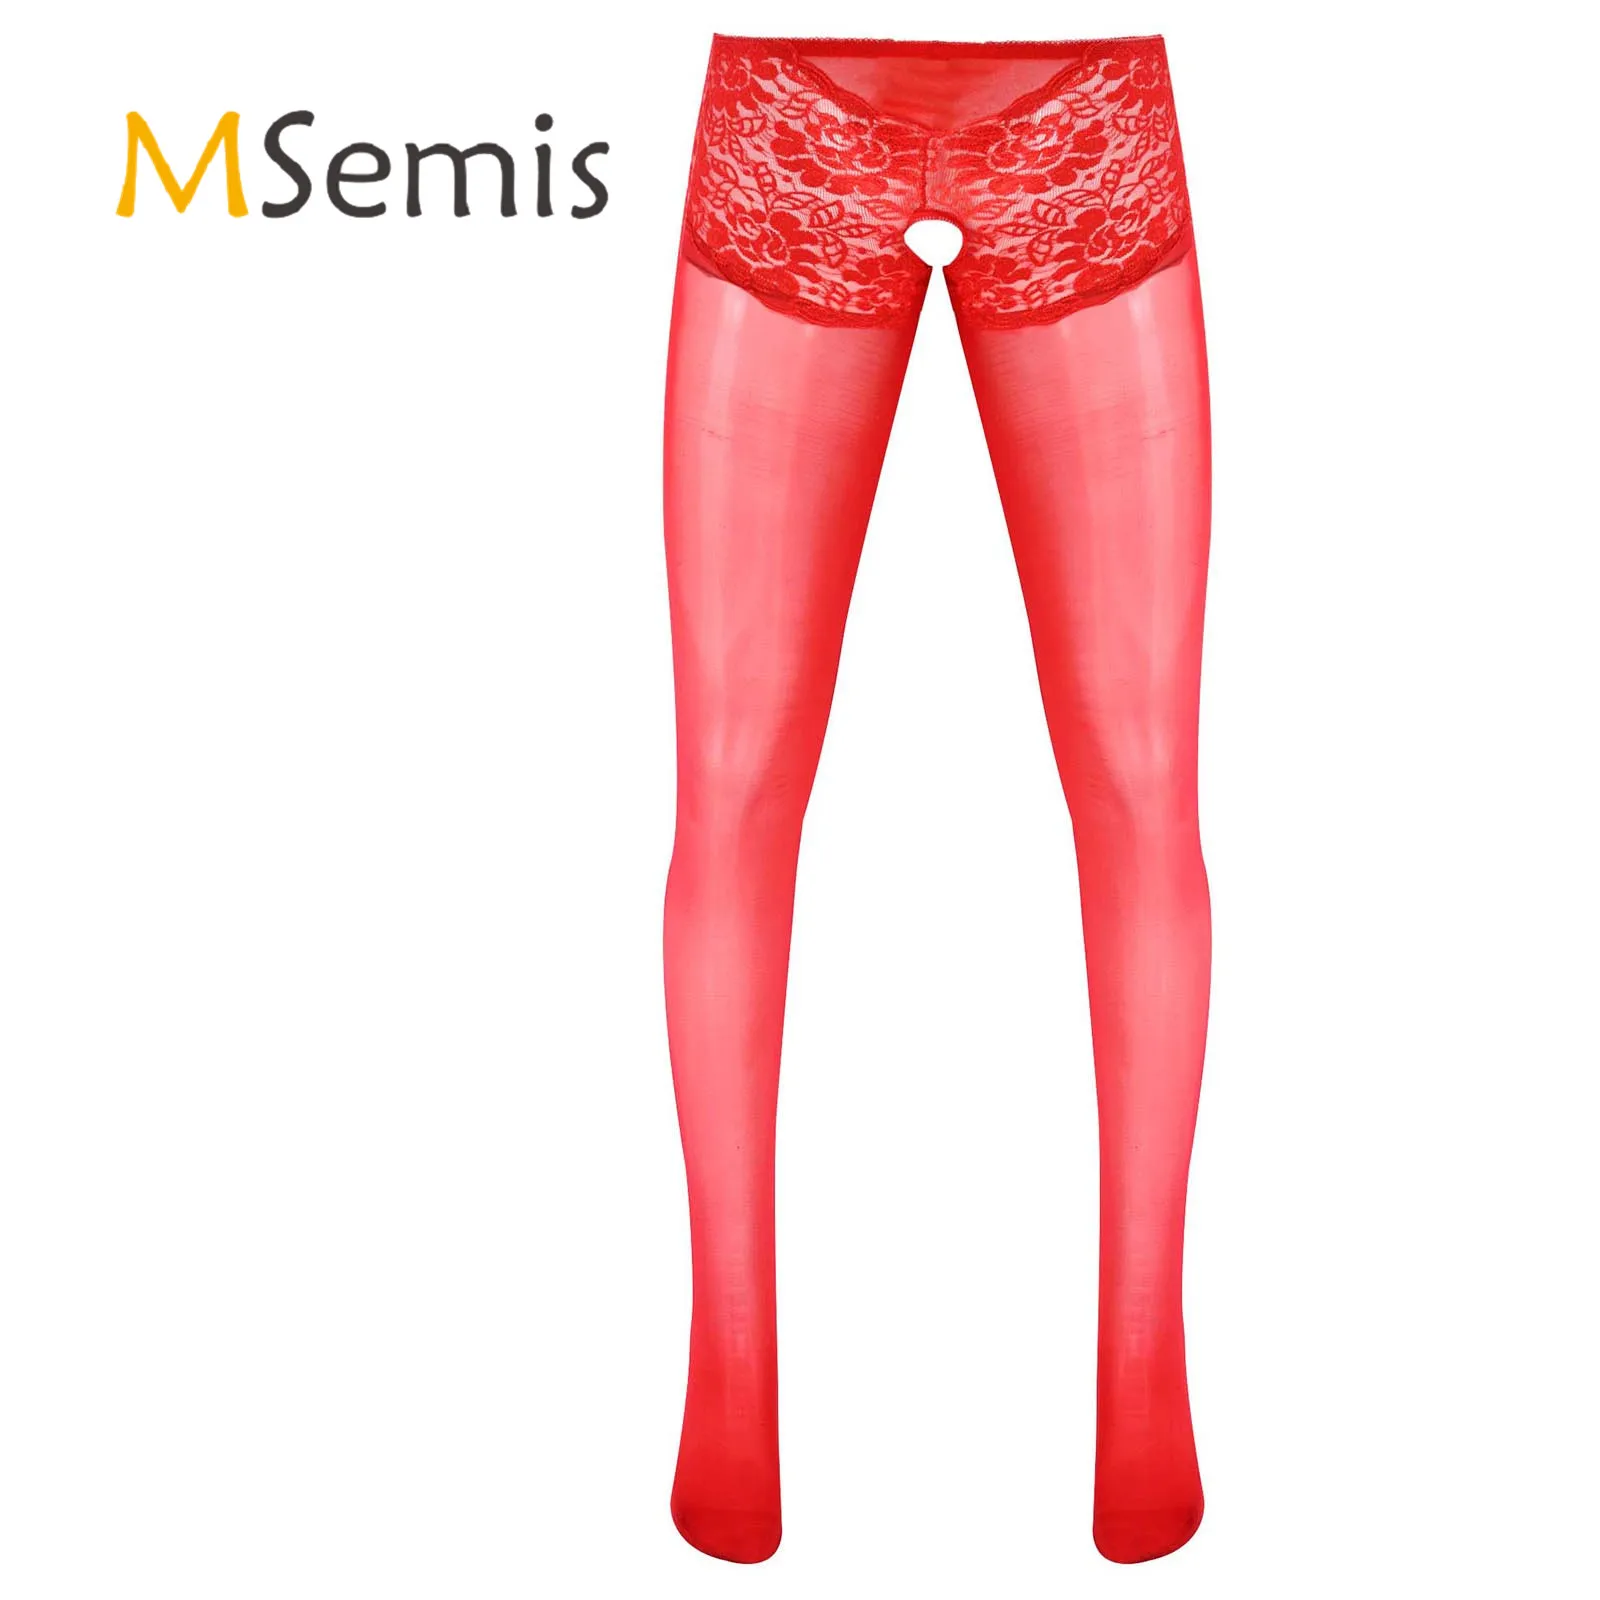 

Mens Lingerie Crotchless Pantyhose Underwear Lace Patchwork Glossy Open Crotch Thin Footed Tights Stockings Sissy Nightwear